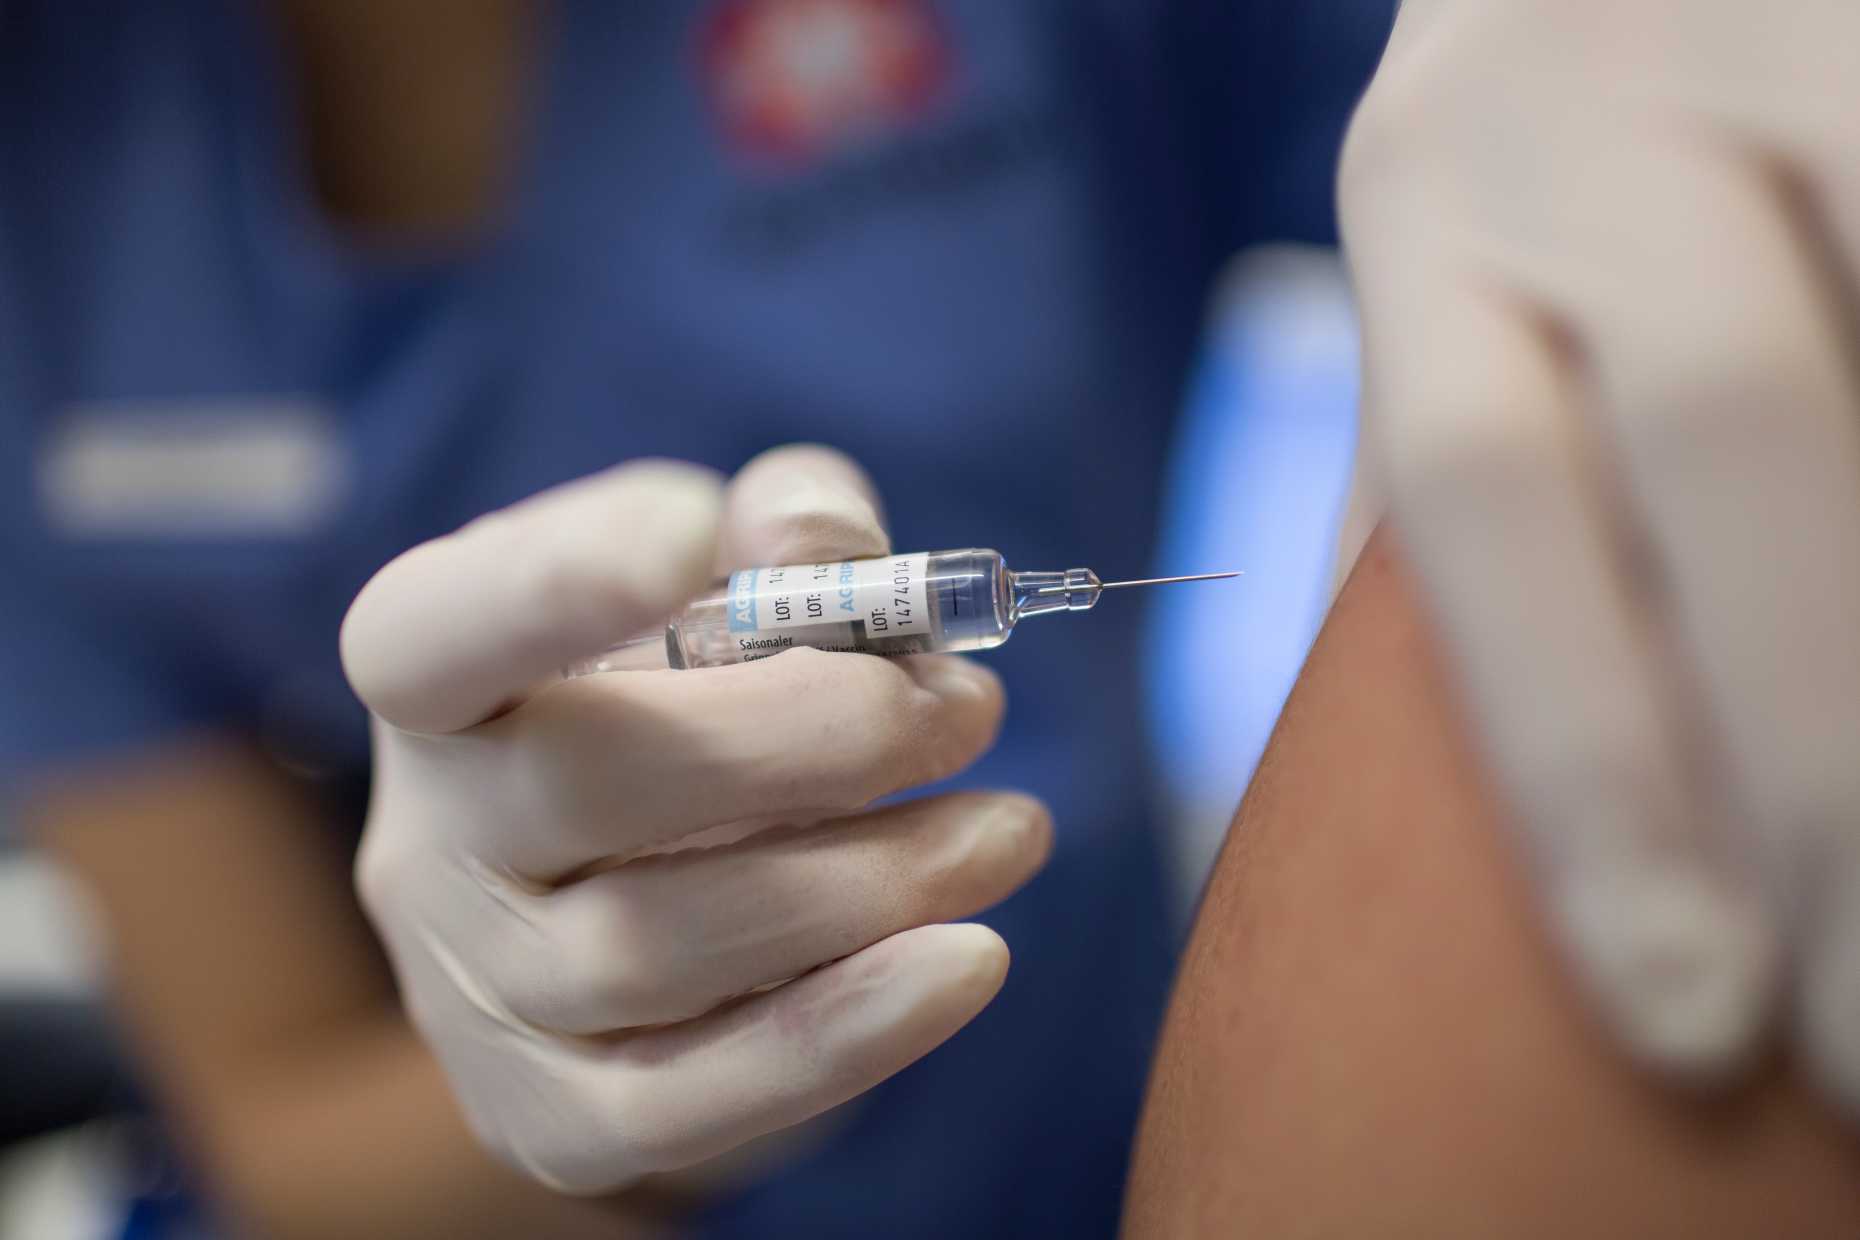 Enlarged view: All members of ETH Zurich can get a vaccination. (Photo: Keystone/Gaetan Bally)